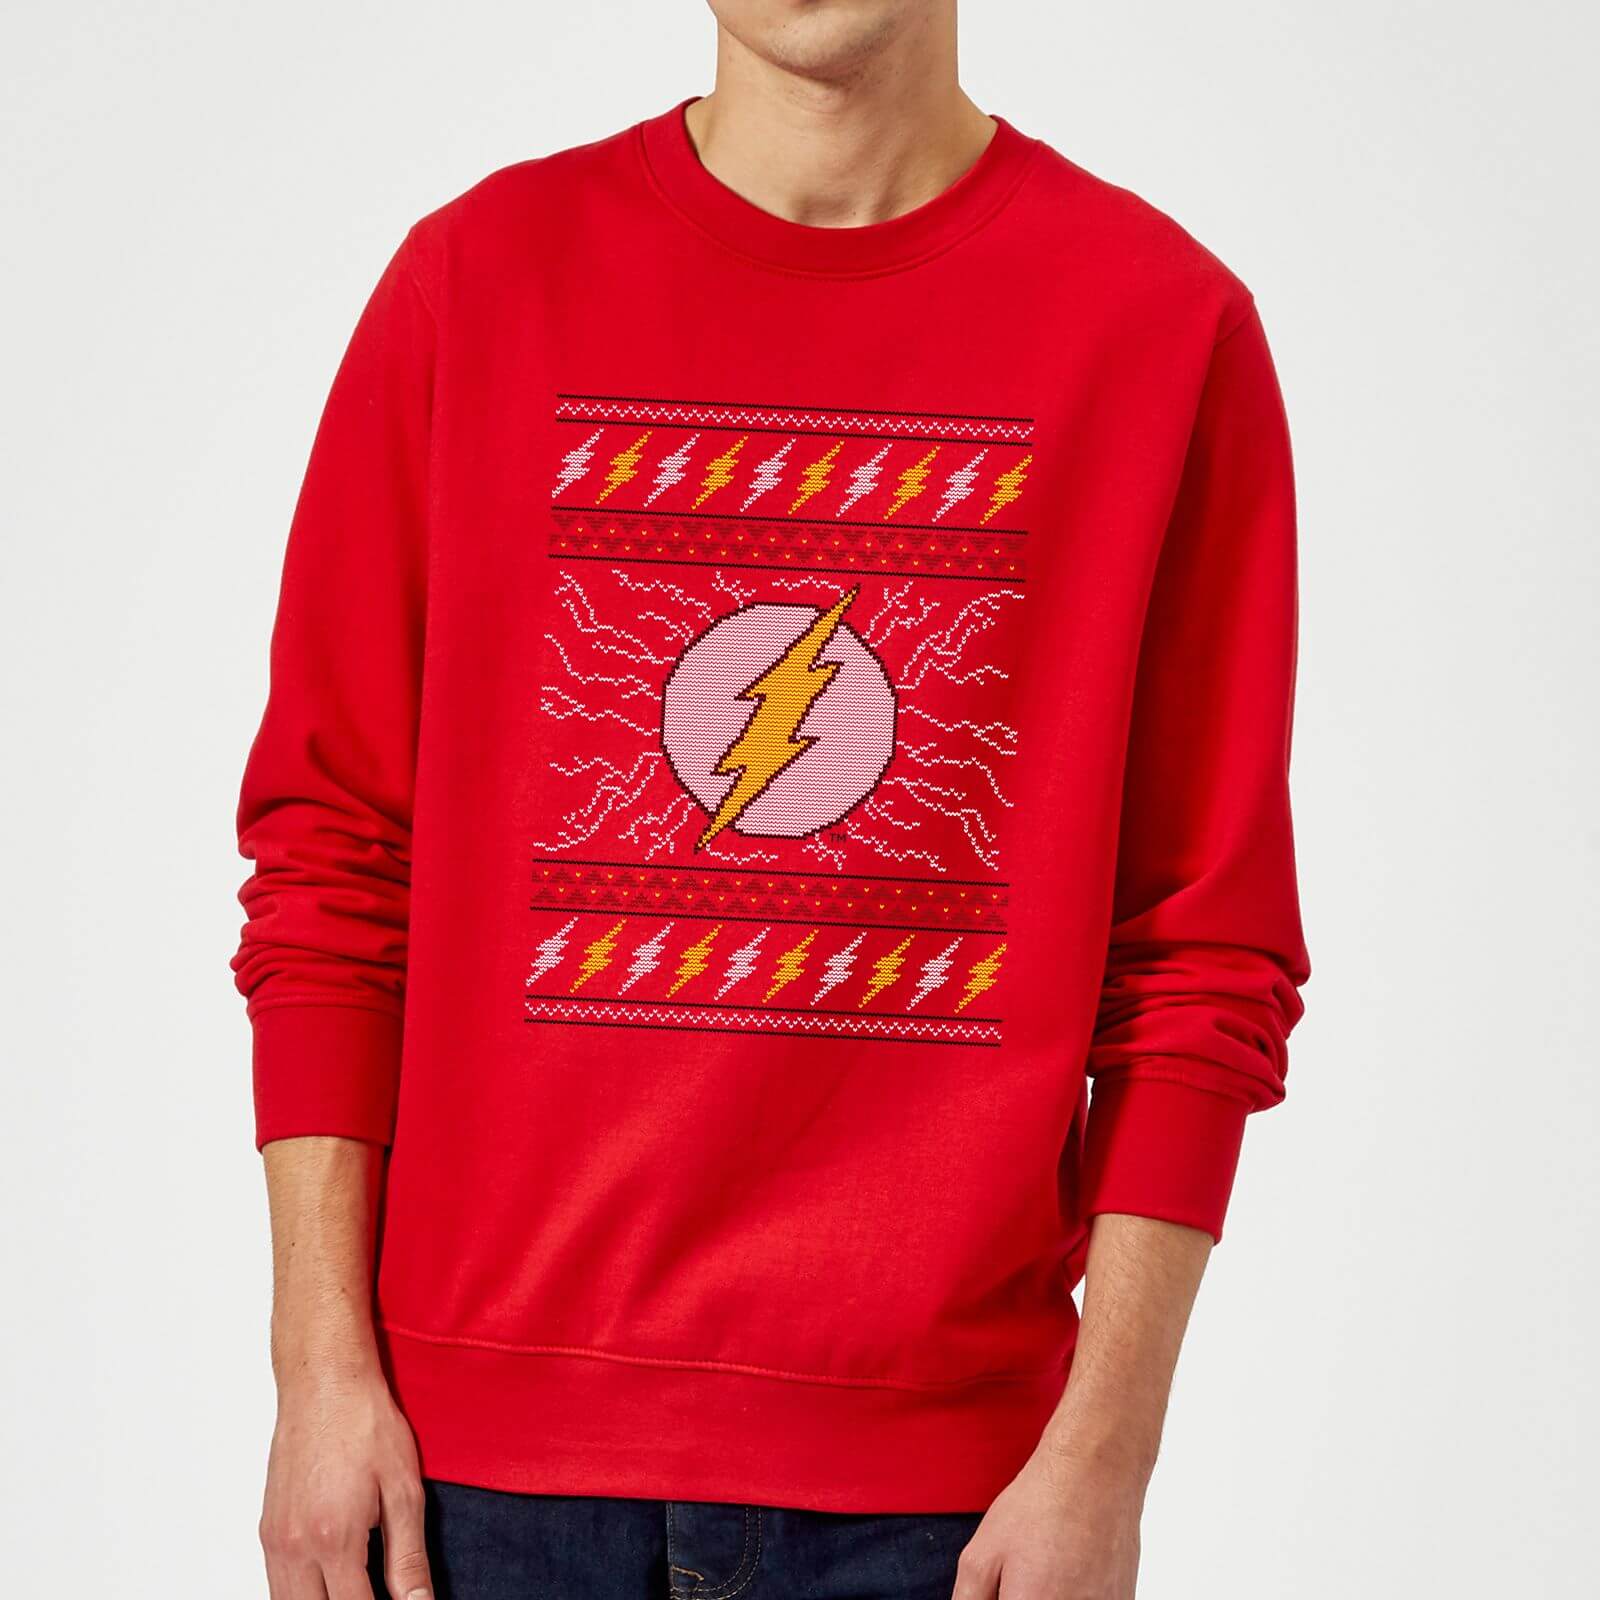 DC Flash Knit Christmas Jumper - Red - M